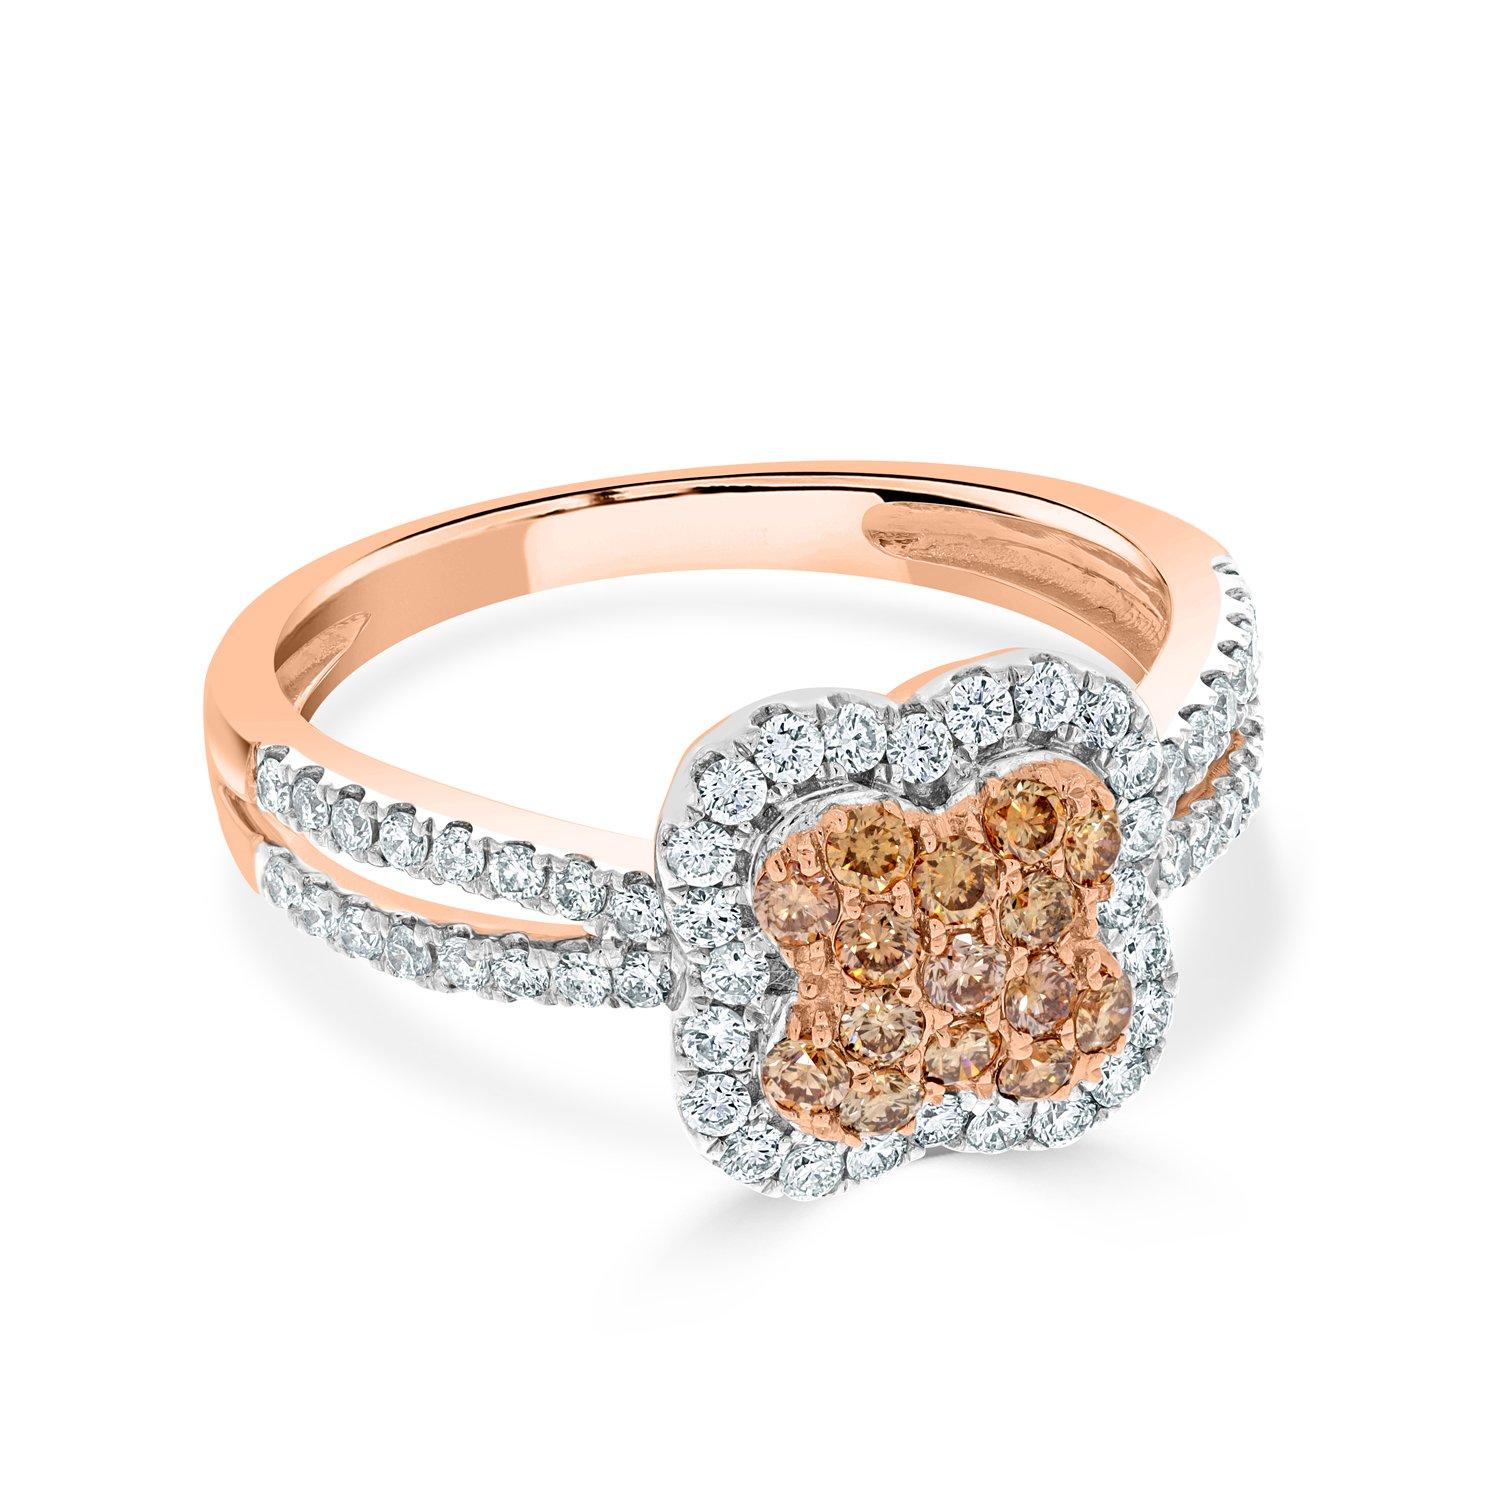 0.28ct Pink Diamonds Ring with 0.43tct Diamonds Set in 14k Rose Gold In New Condition For Sale In New York, NY